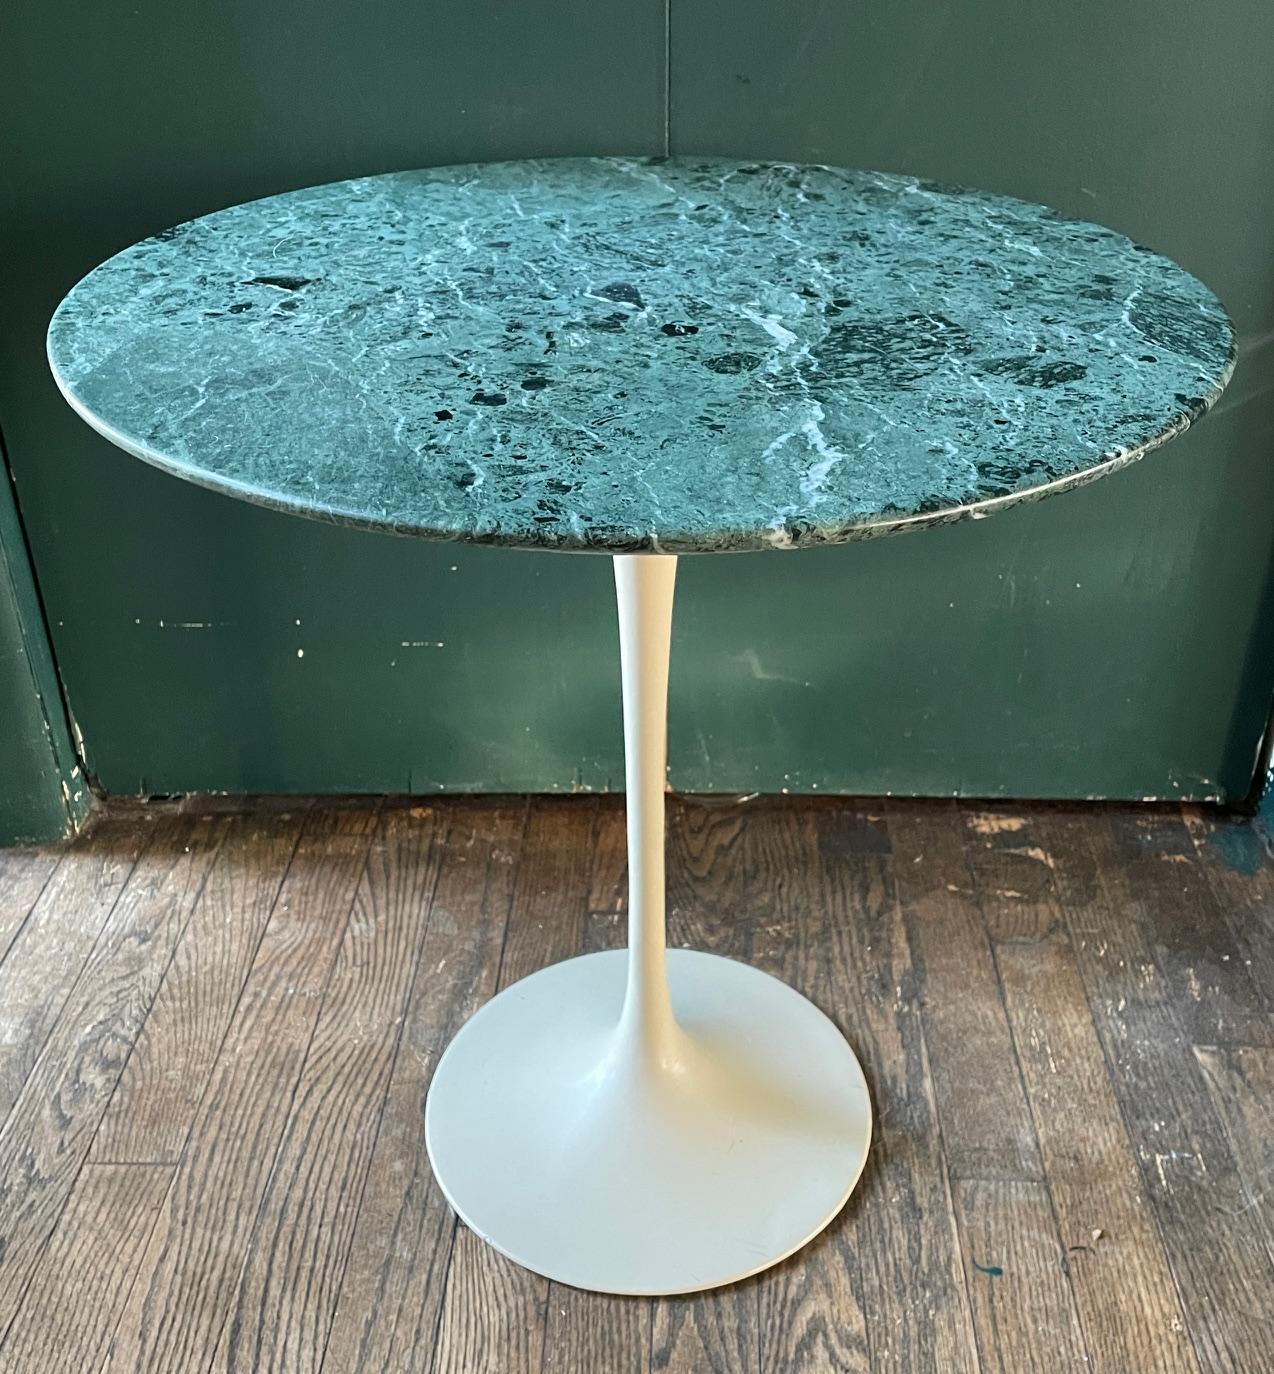 Wonderful rare marble Knoll pedestal side table.  Estate fresh, retains label to bottom of base.  Will be shipped with top unscrewed and removed. No chips and no cracks to the marble top.  Base has some light wear that is pictured.